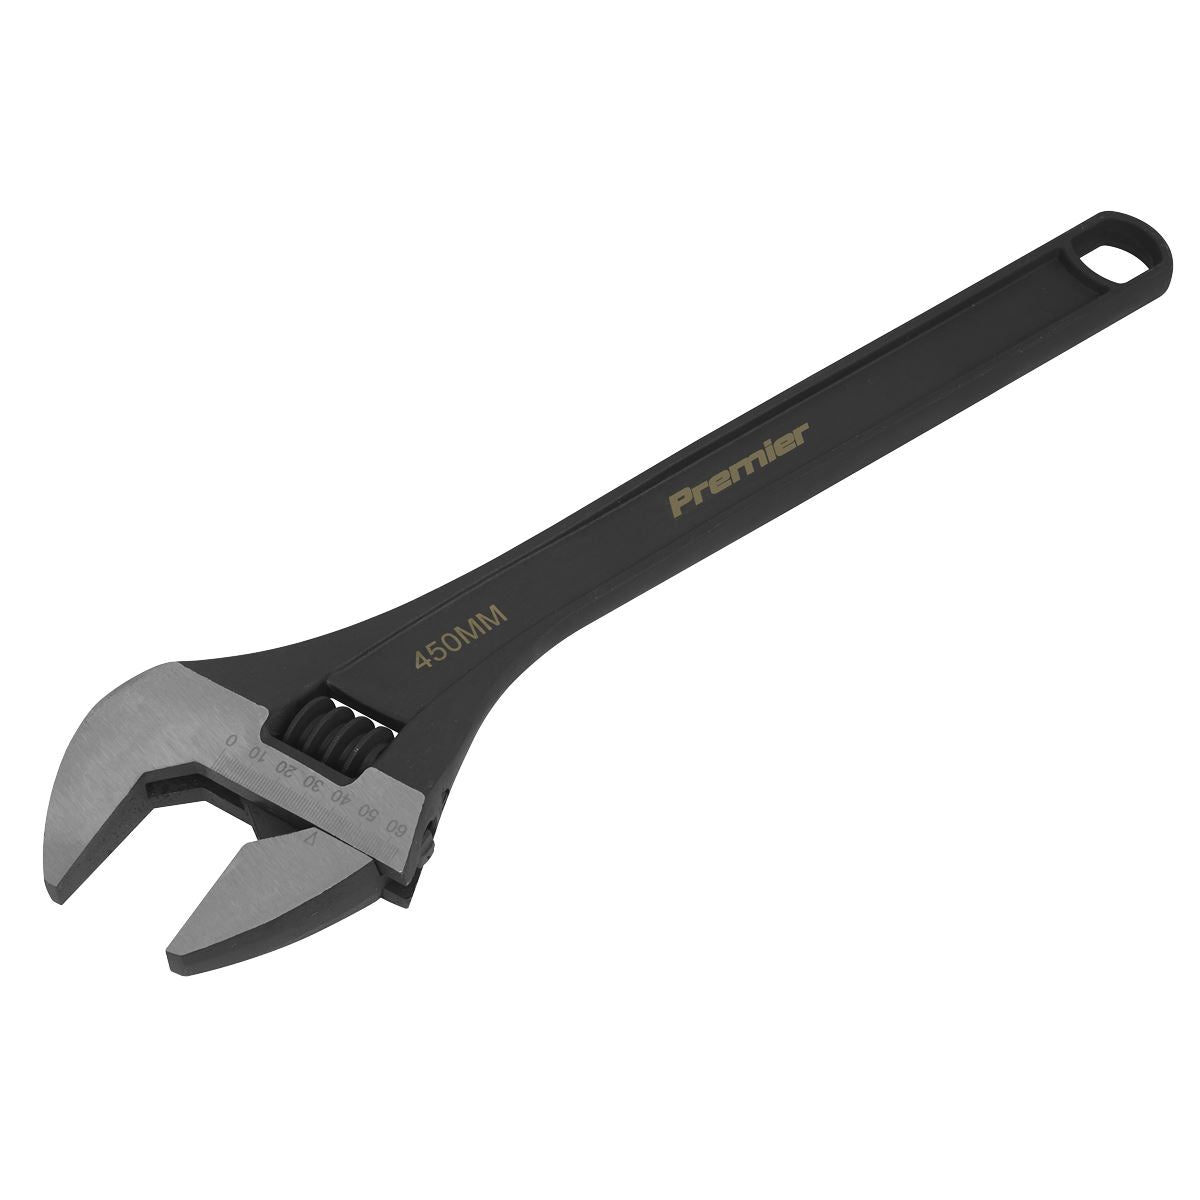 Sealey Premier Adjustable Wrench 450mm Jaw Capacity 50mm